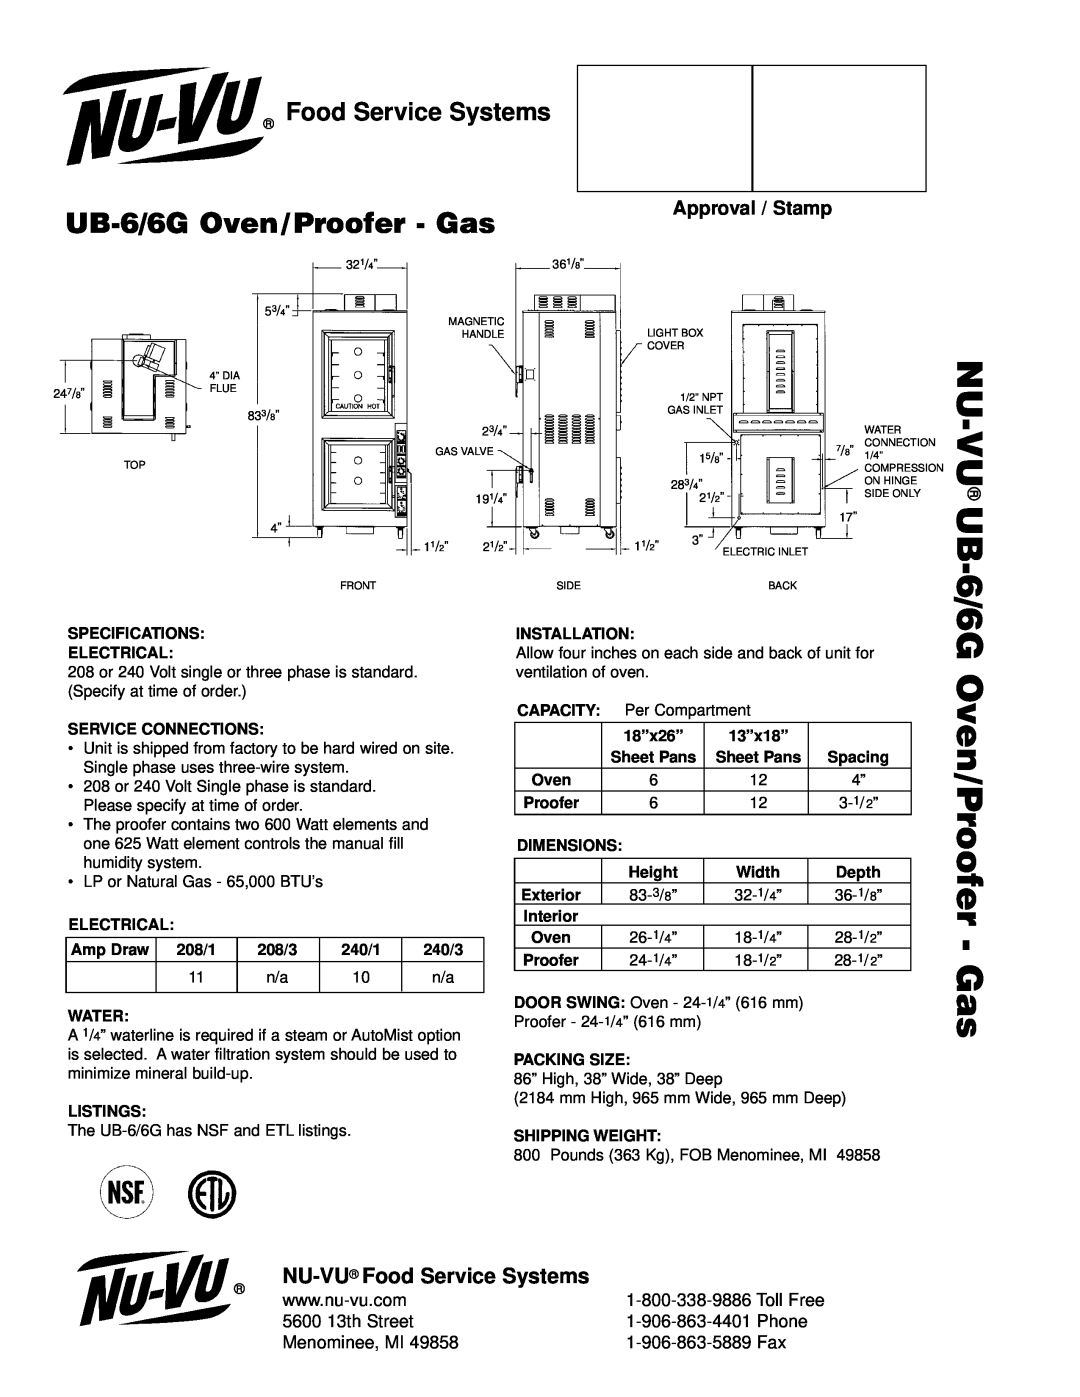 Middleby Cooking Systems Group UB 6/6G manual NU-VU UB-6/6G, UB-6/6GOven/Proofer - Gas, Food Service Systems, Phone 